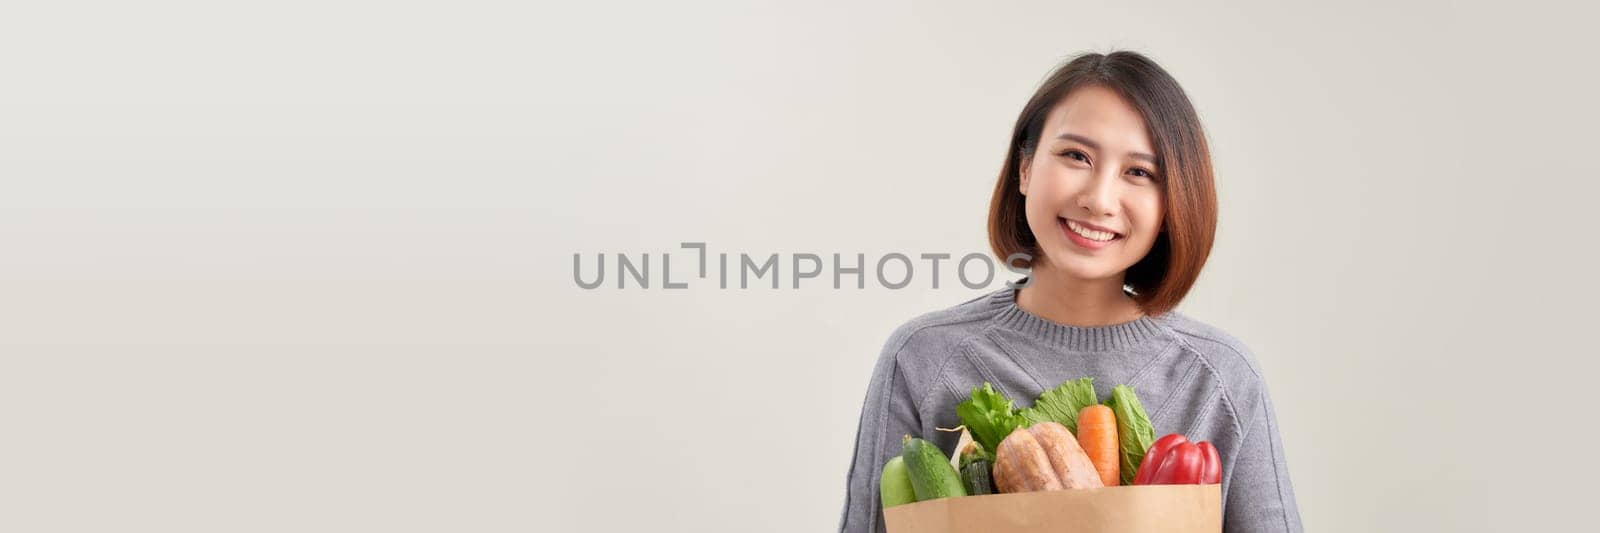 Smiling asian woman happily holding a bag of vegetables, healthy eating and wellness concept.